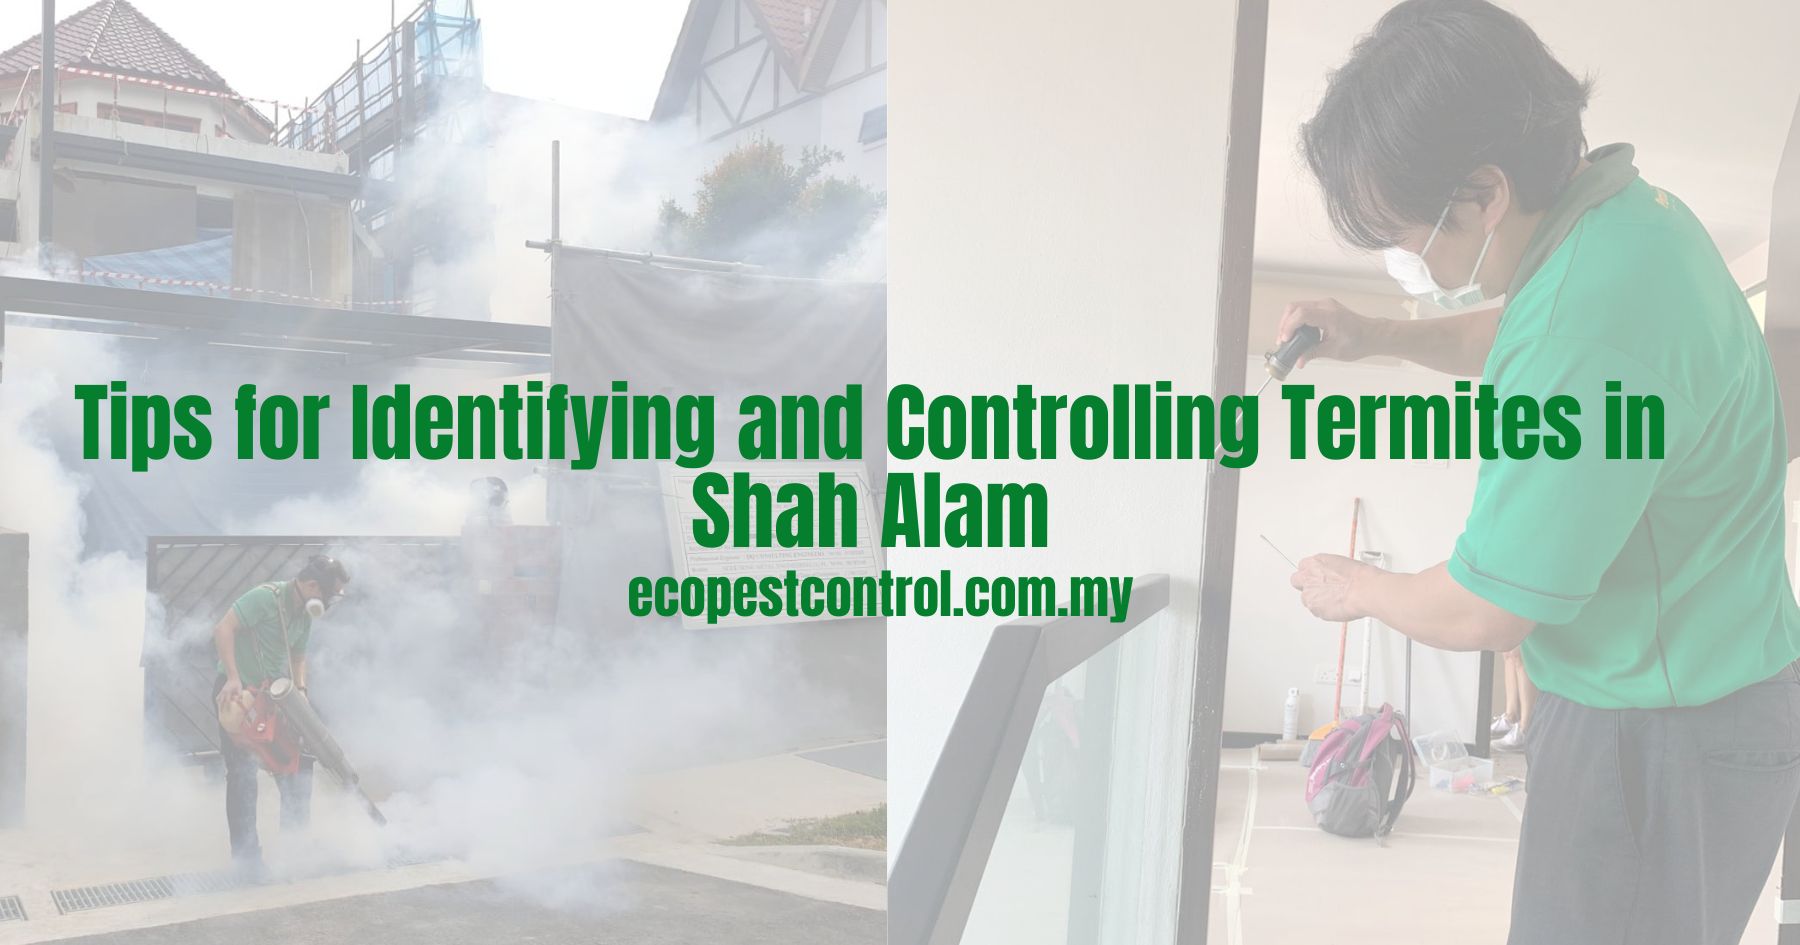 Tips for Identifying and Controlling Termites in Shah Alam